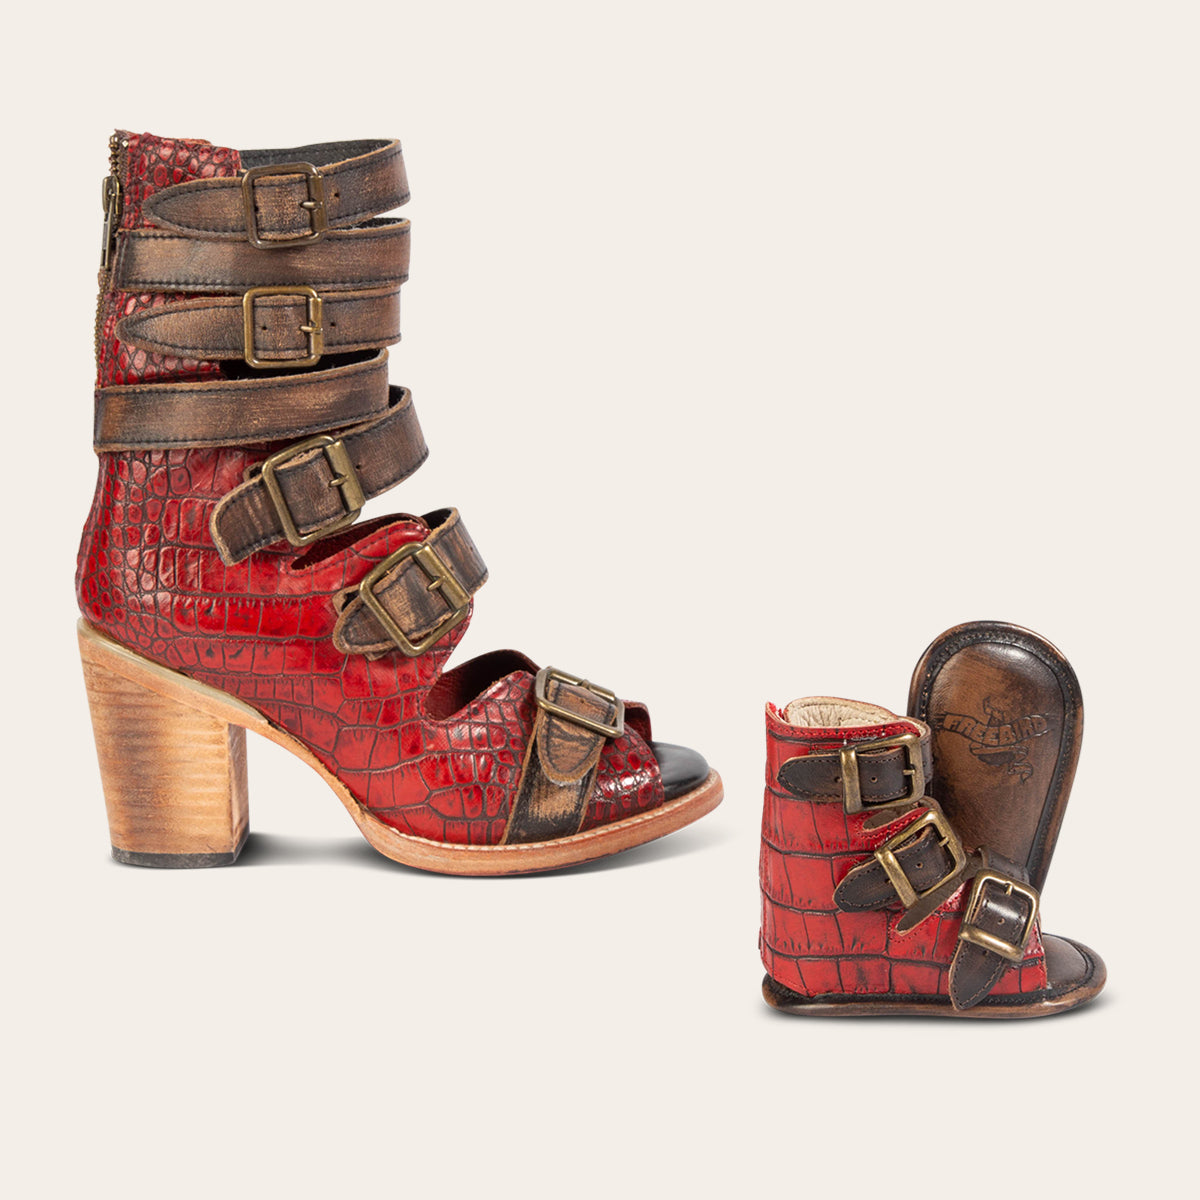 FREEBIRD women's bond red croco and matching infant baby bond leather sandal showing buckle fashion straps and soft imprinted leather sole